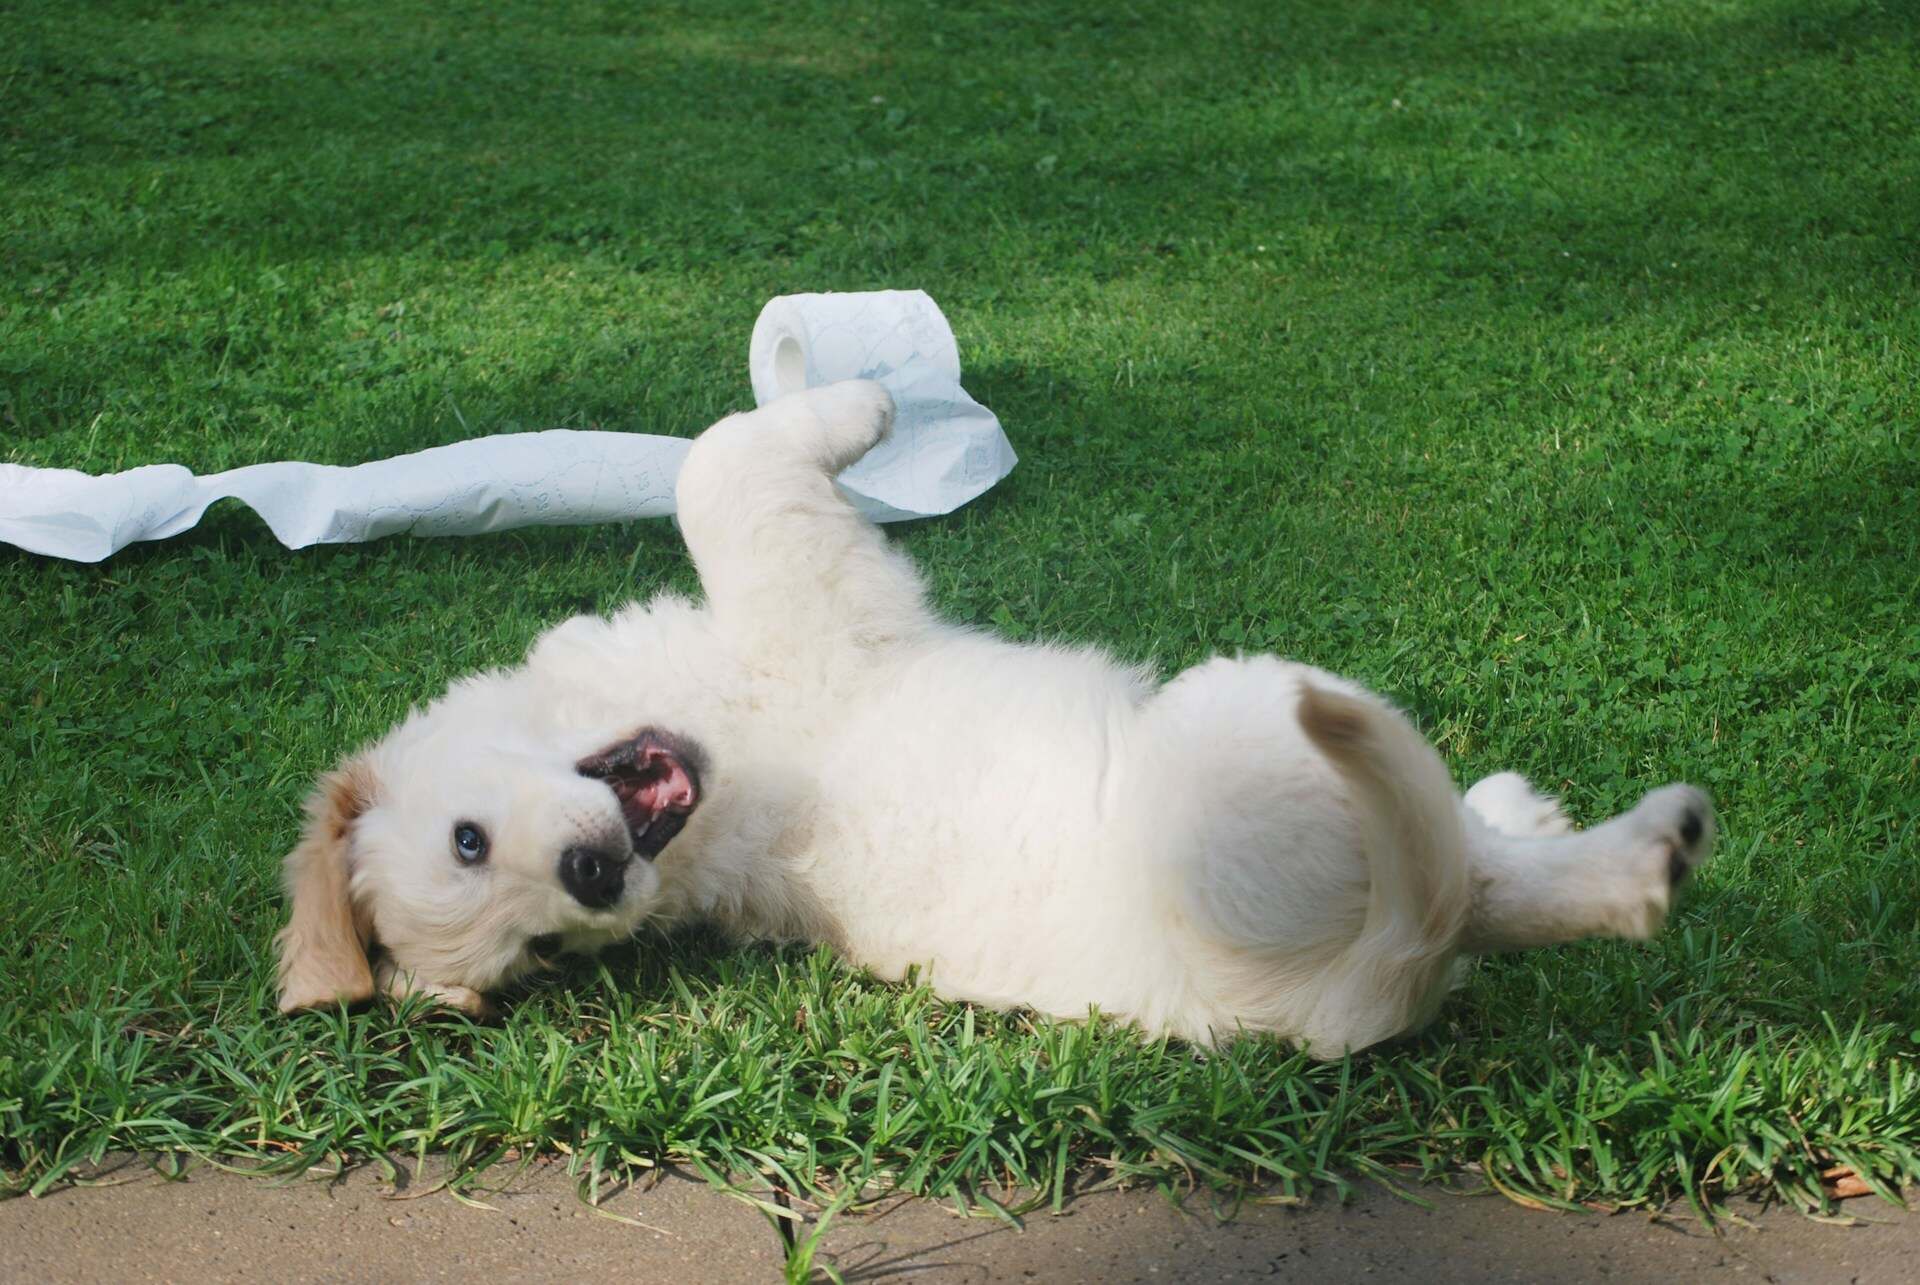 A puppy lying in the grass on a lawn with a roll of toilet paper behind them